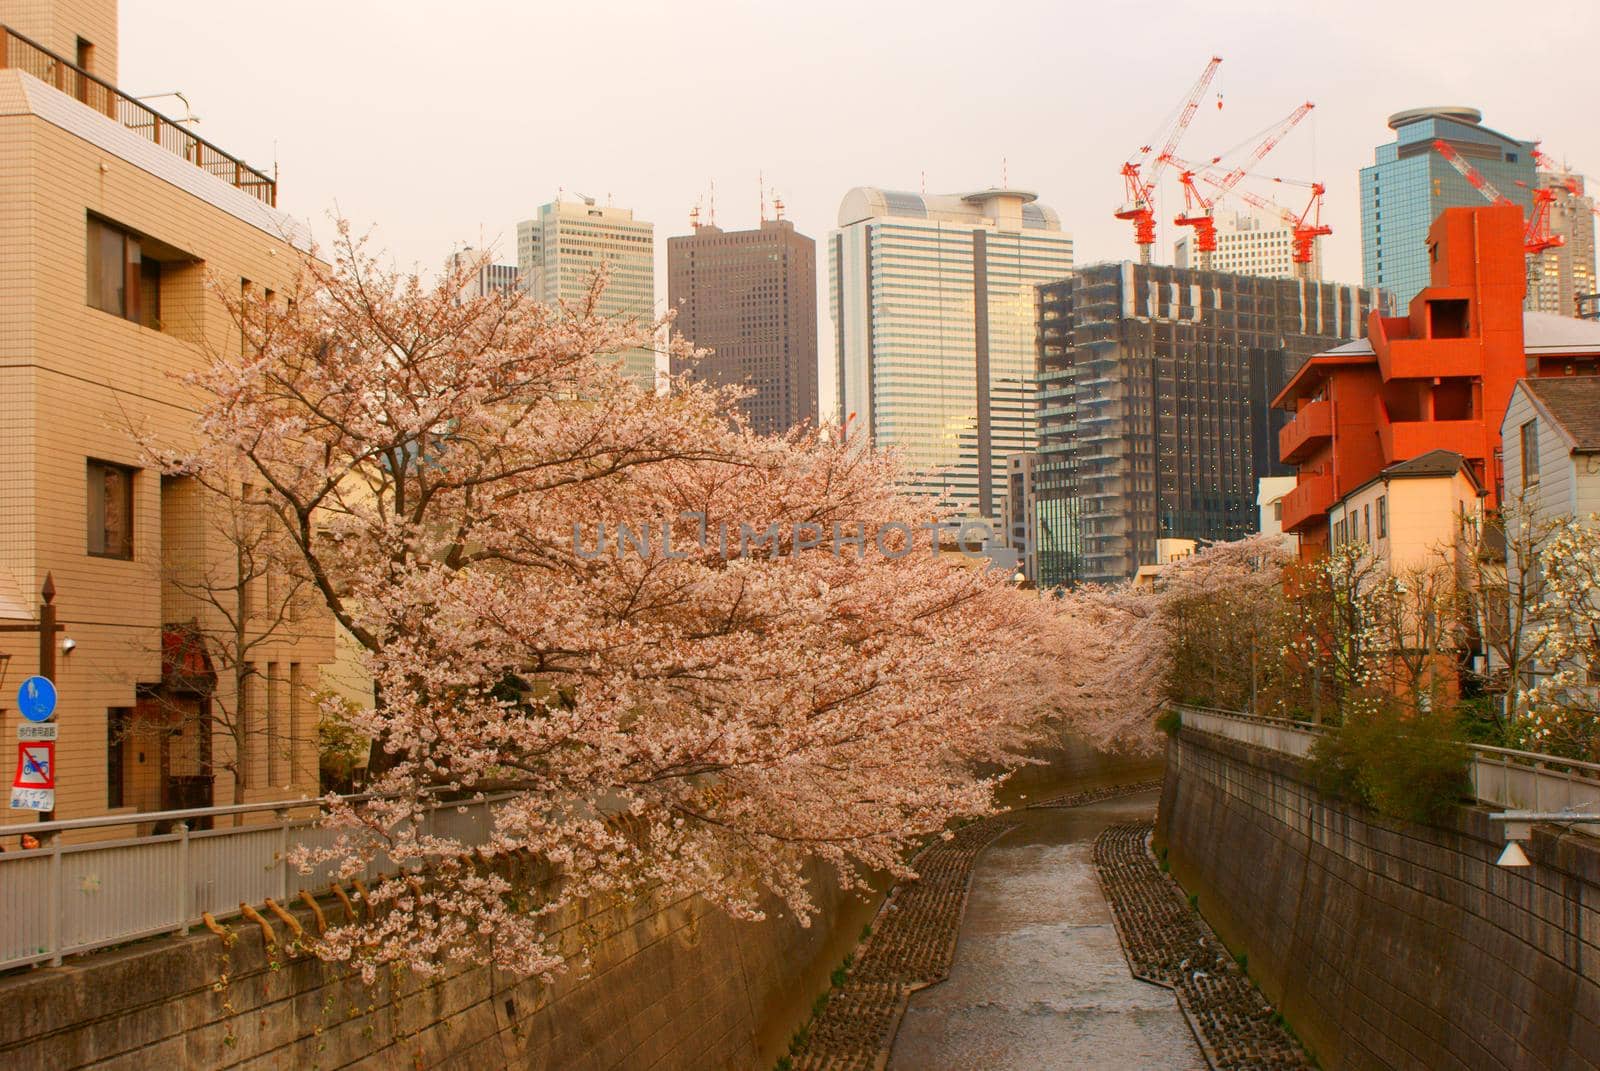 Image of cherry blossoms blooming in the city. Shooting Location: Tokyo metropolitan area